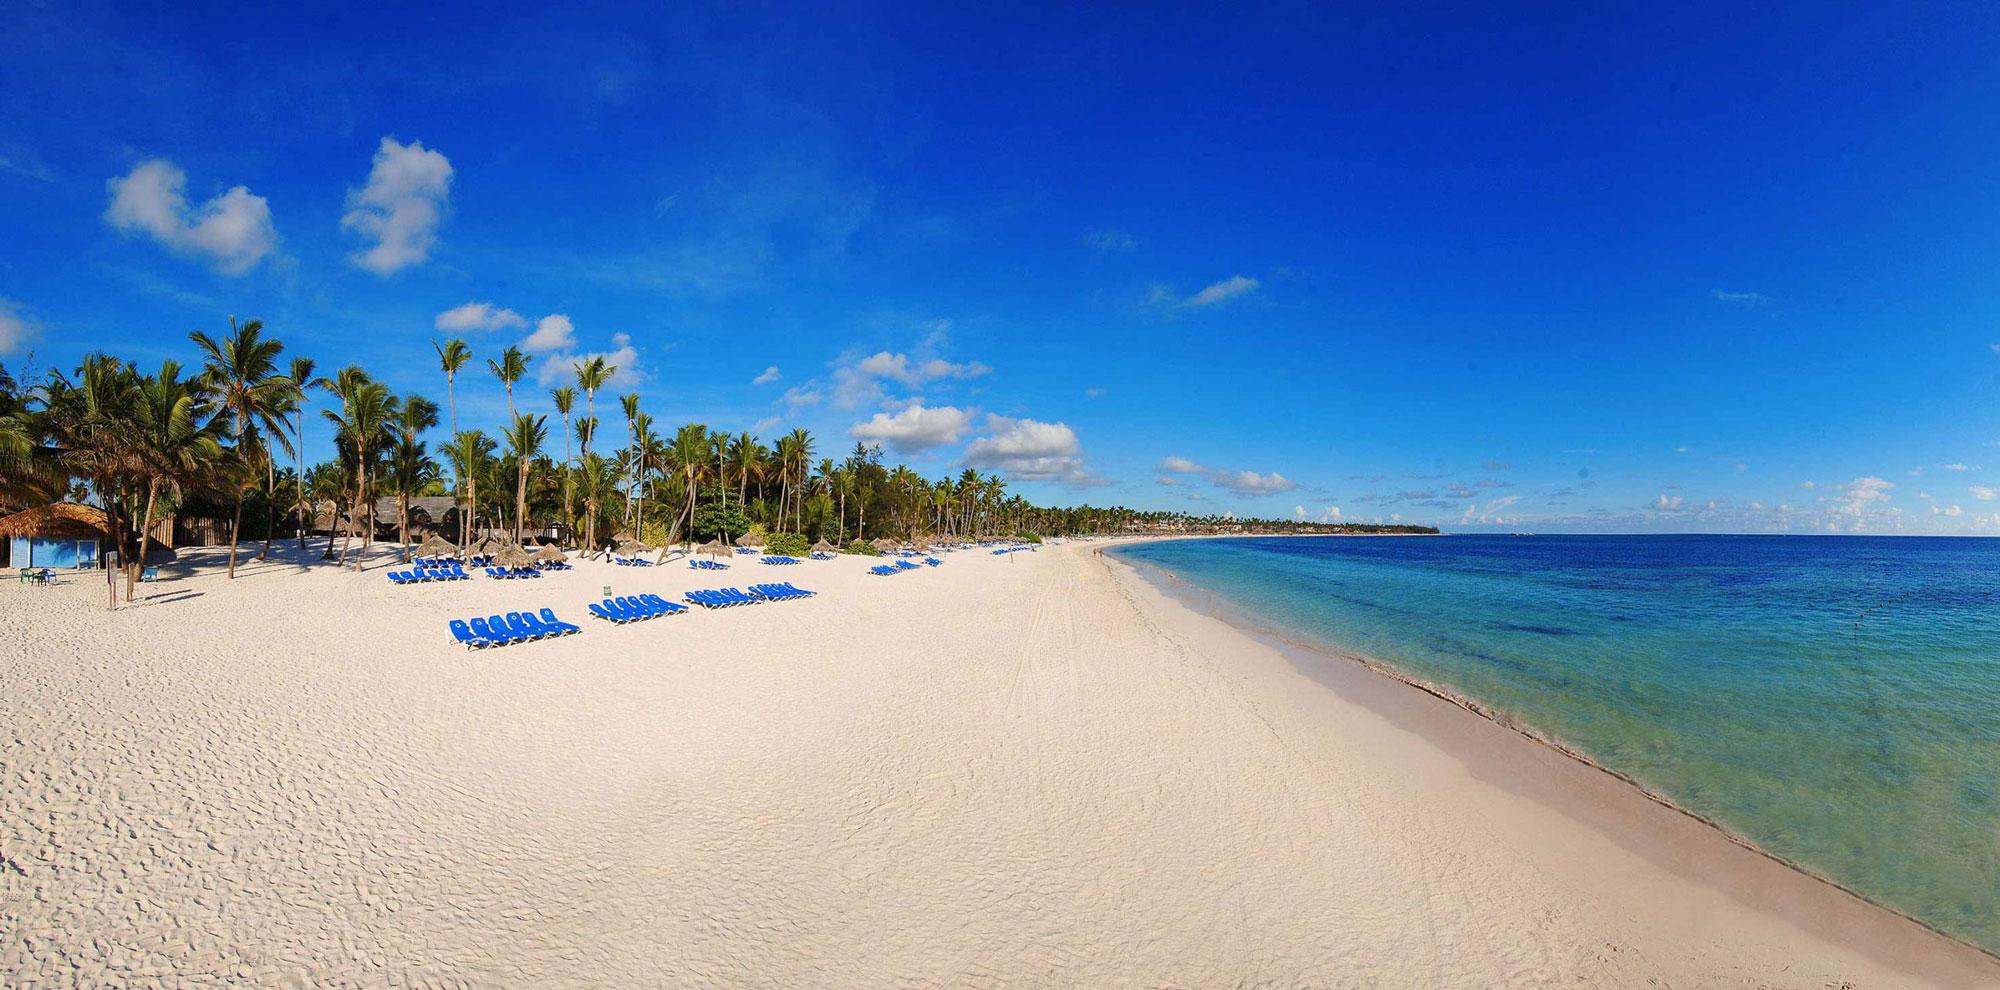 The Melia Caribe Tropical Golf  Beach Resort's lovely beach situated in vibrant Dominican Republic.